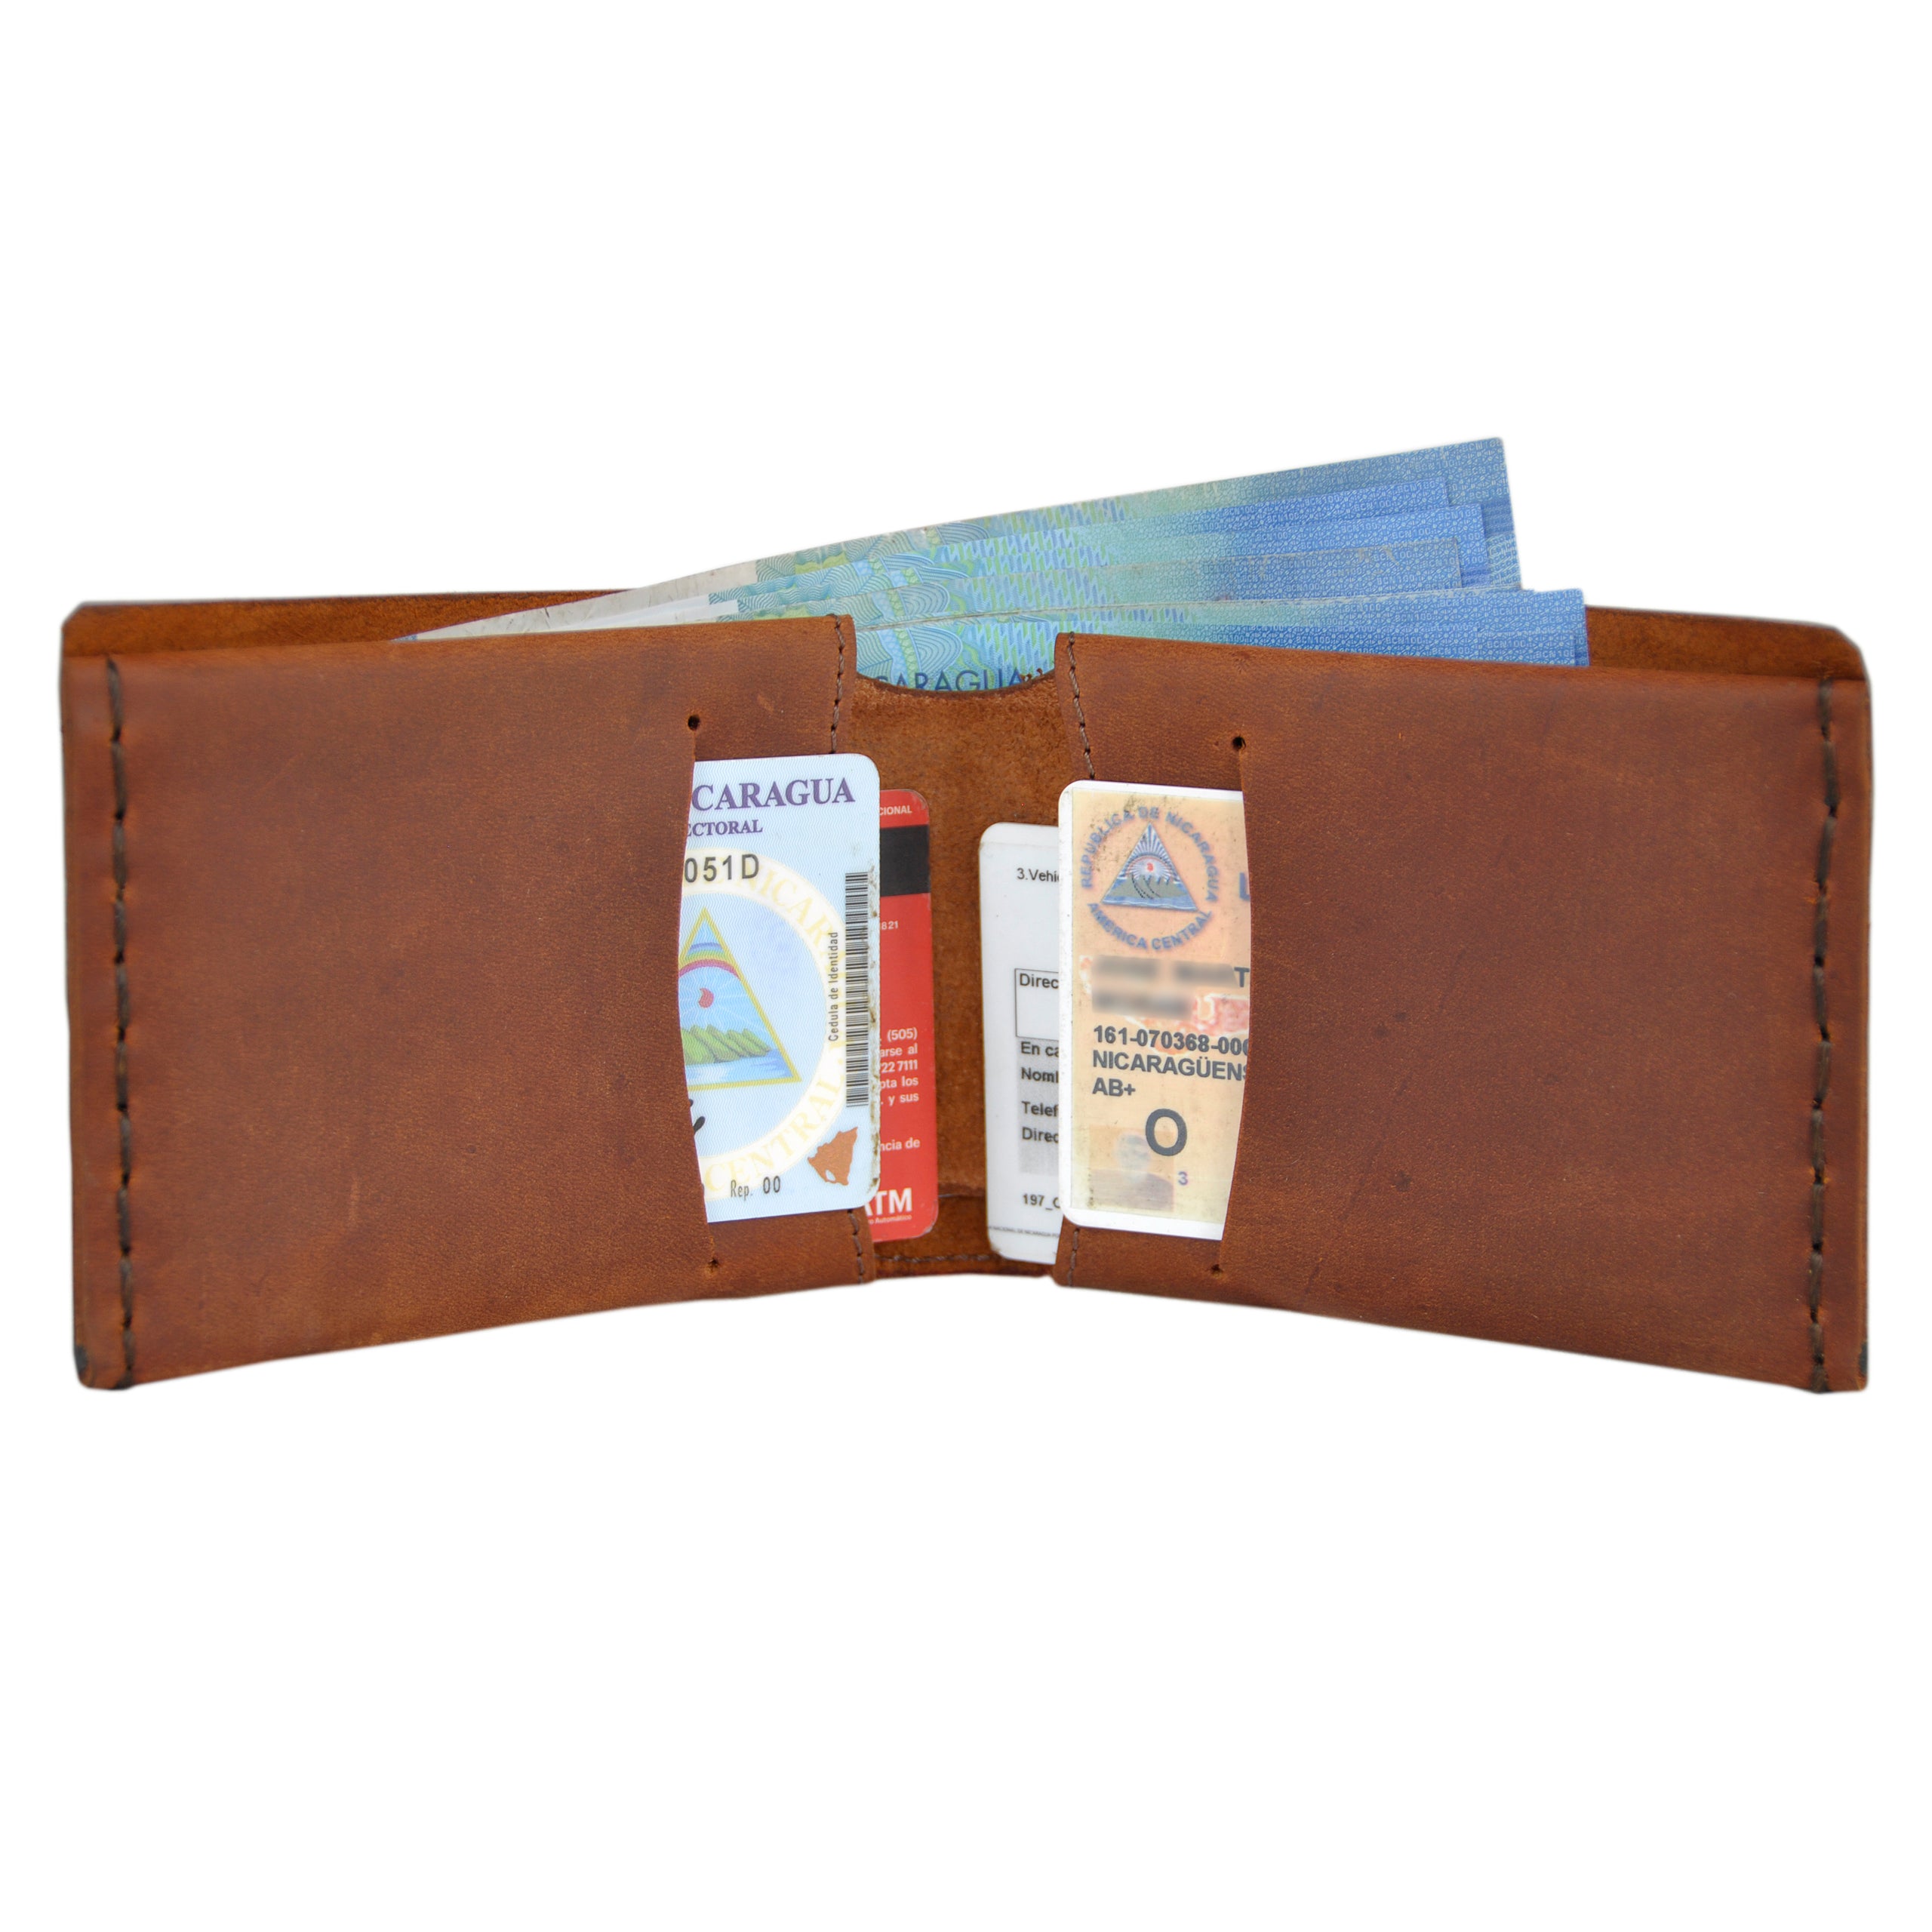 Brown Hand Stitched Wallet - Genuine Leather